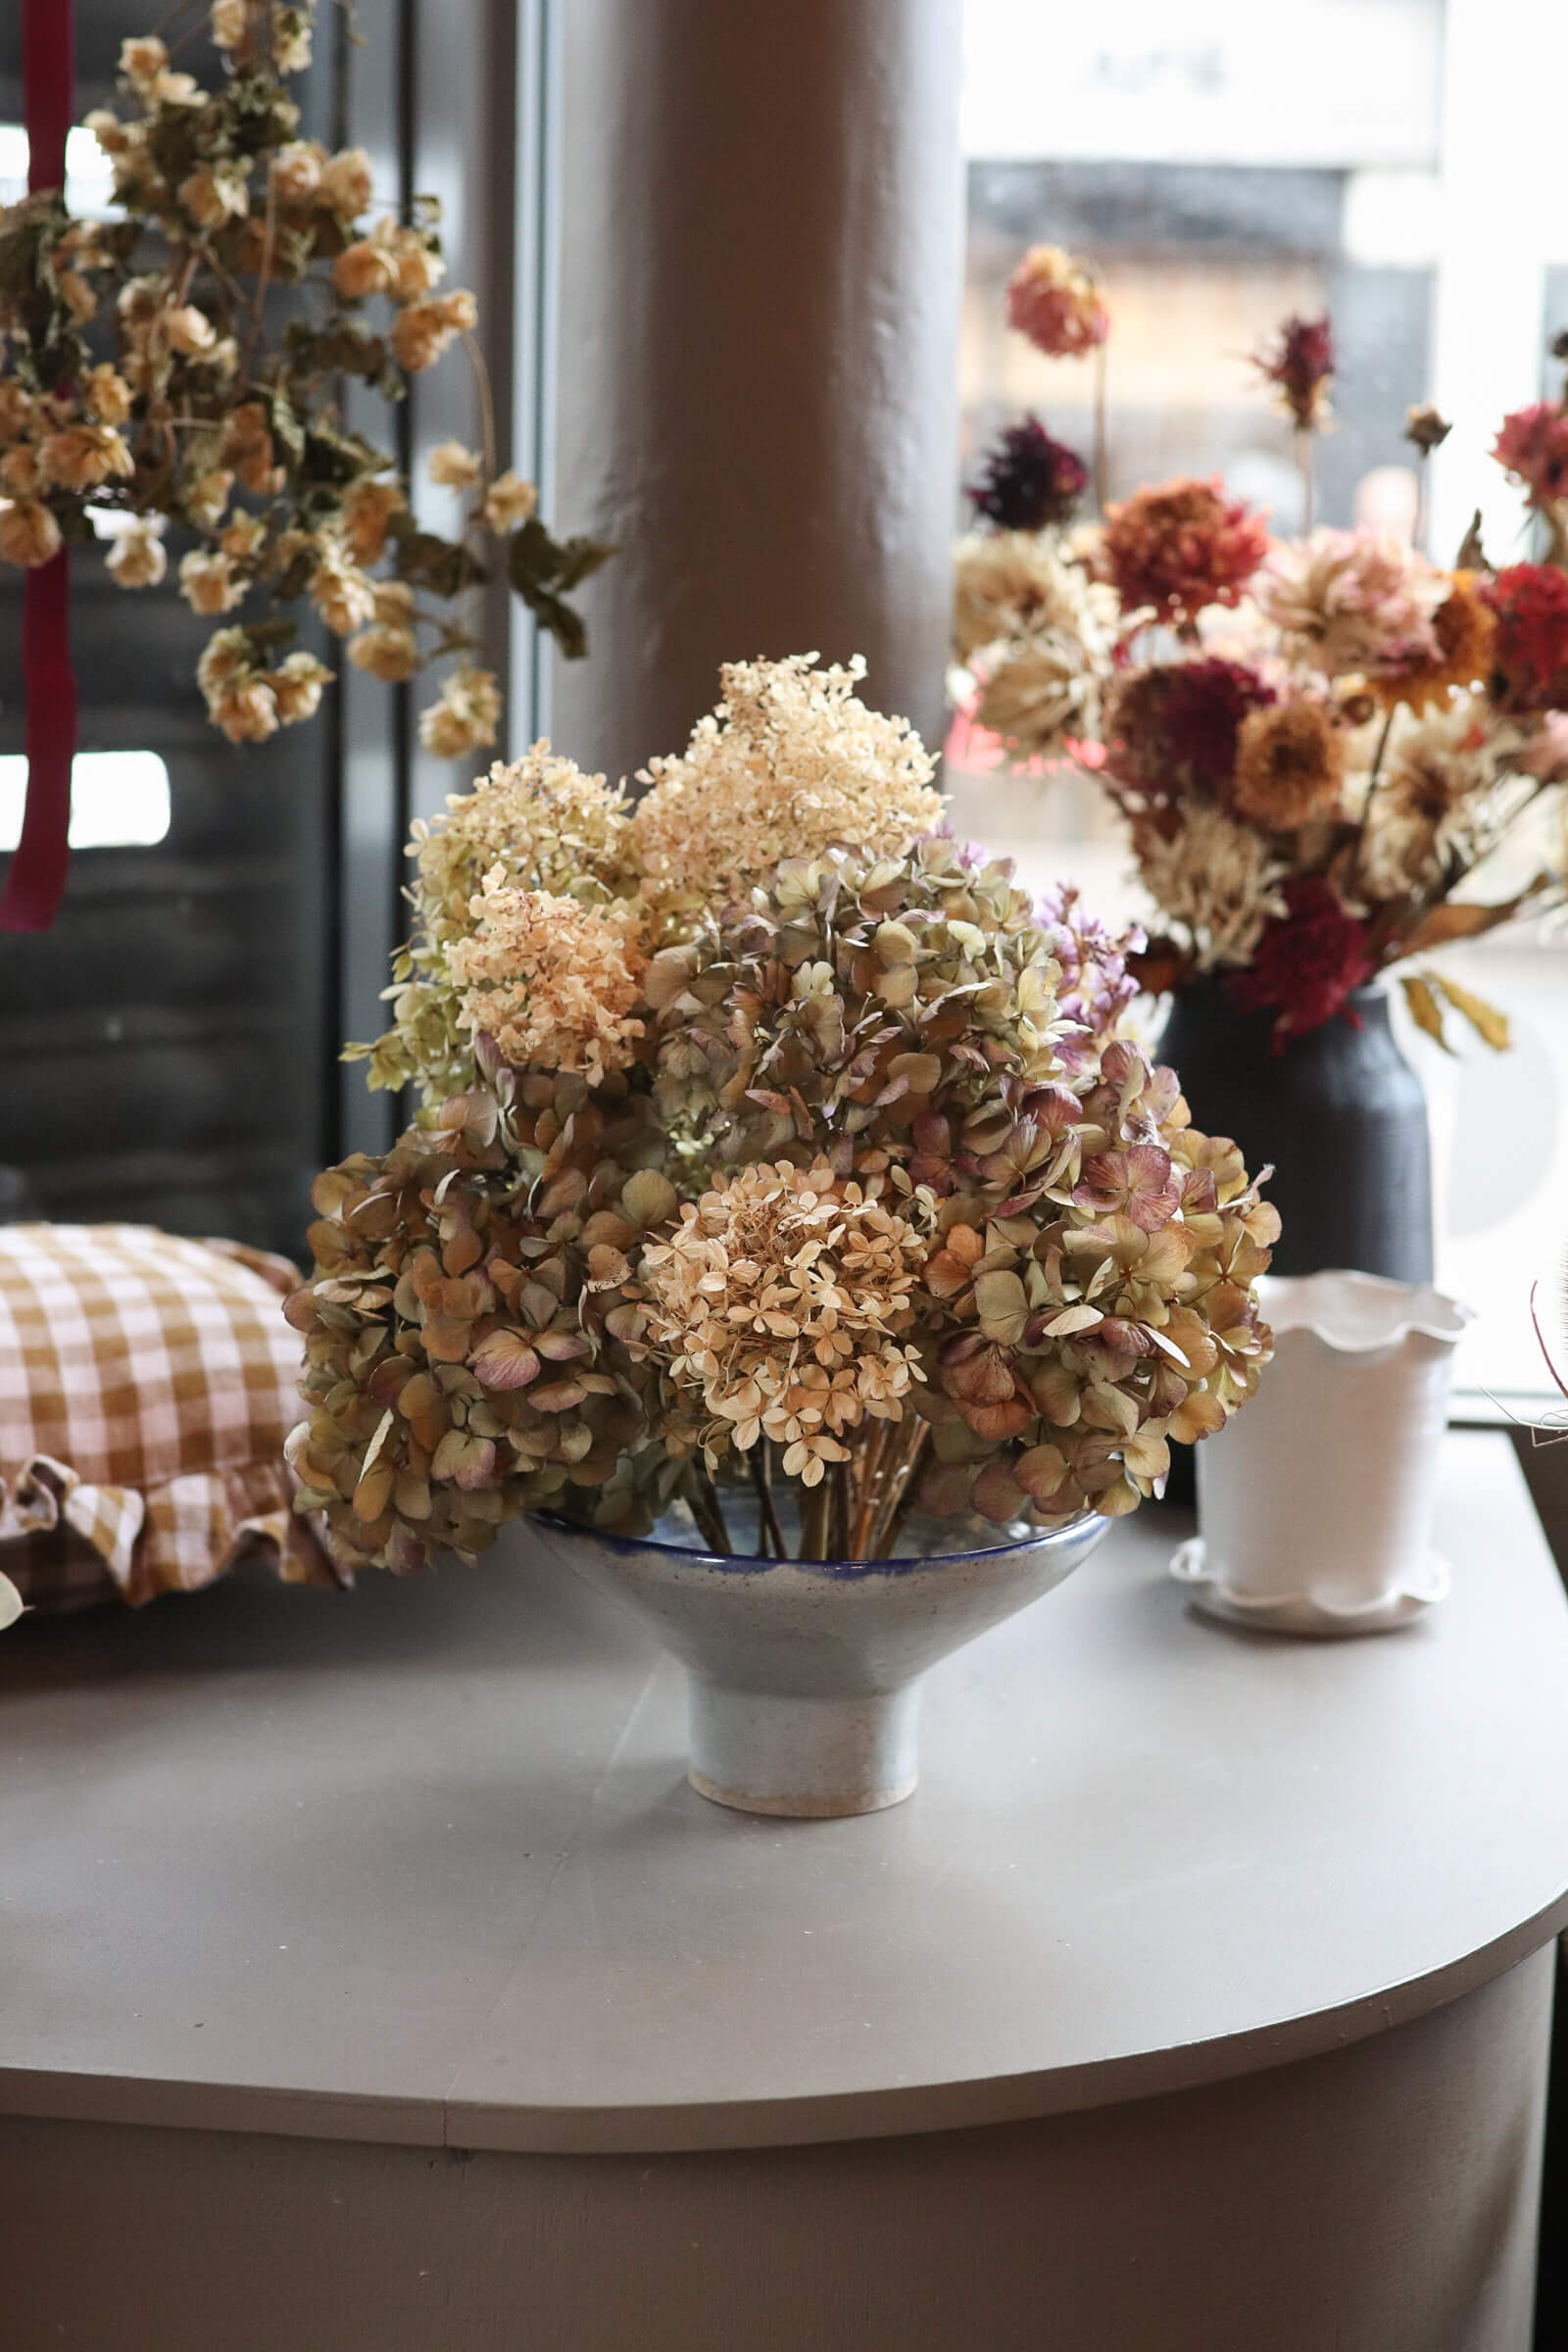 Bohemian interiors and homeware including dried hydrangea and gingham cushions inside independent flower shop Hedge, Birmingham